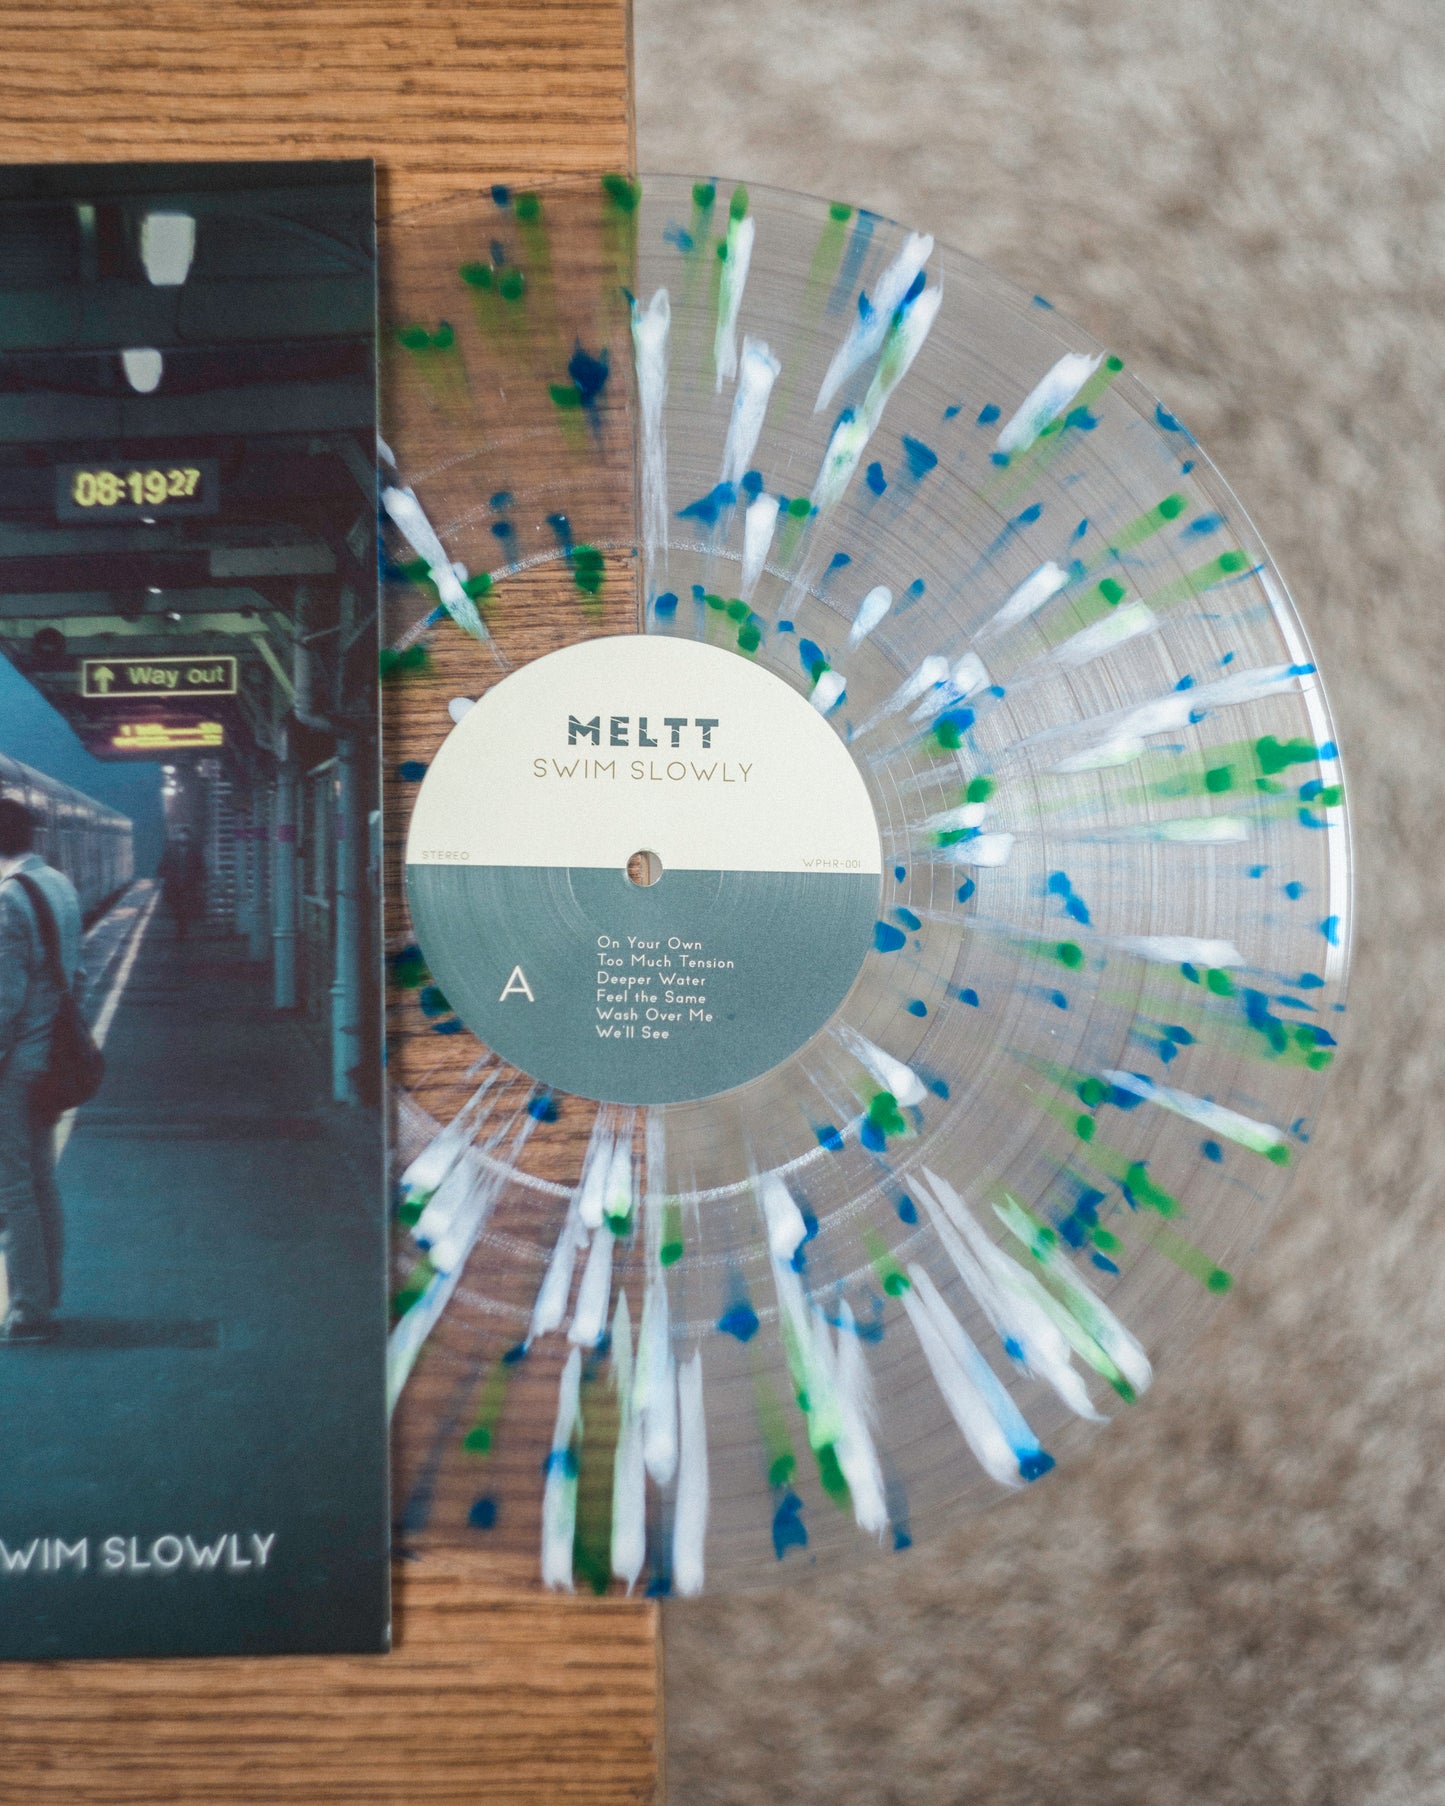 4th Press Limited Edition 12" Clear+White+Blue+Green Splatter Vinyl